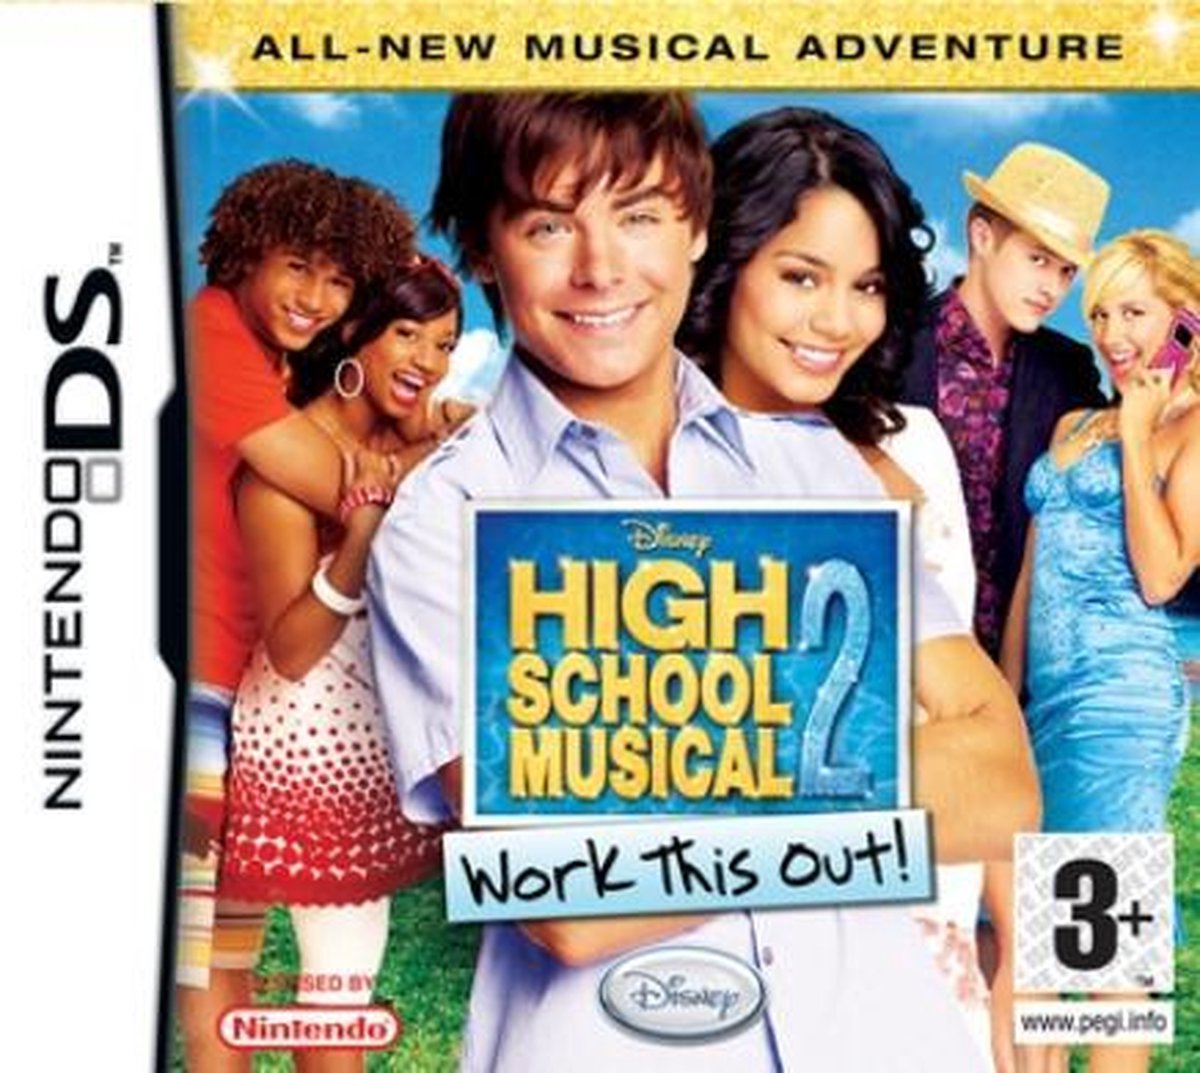 Disney High School Musical 2: Work This Out - Disney Interactive